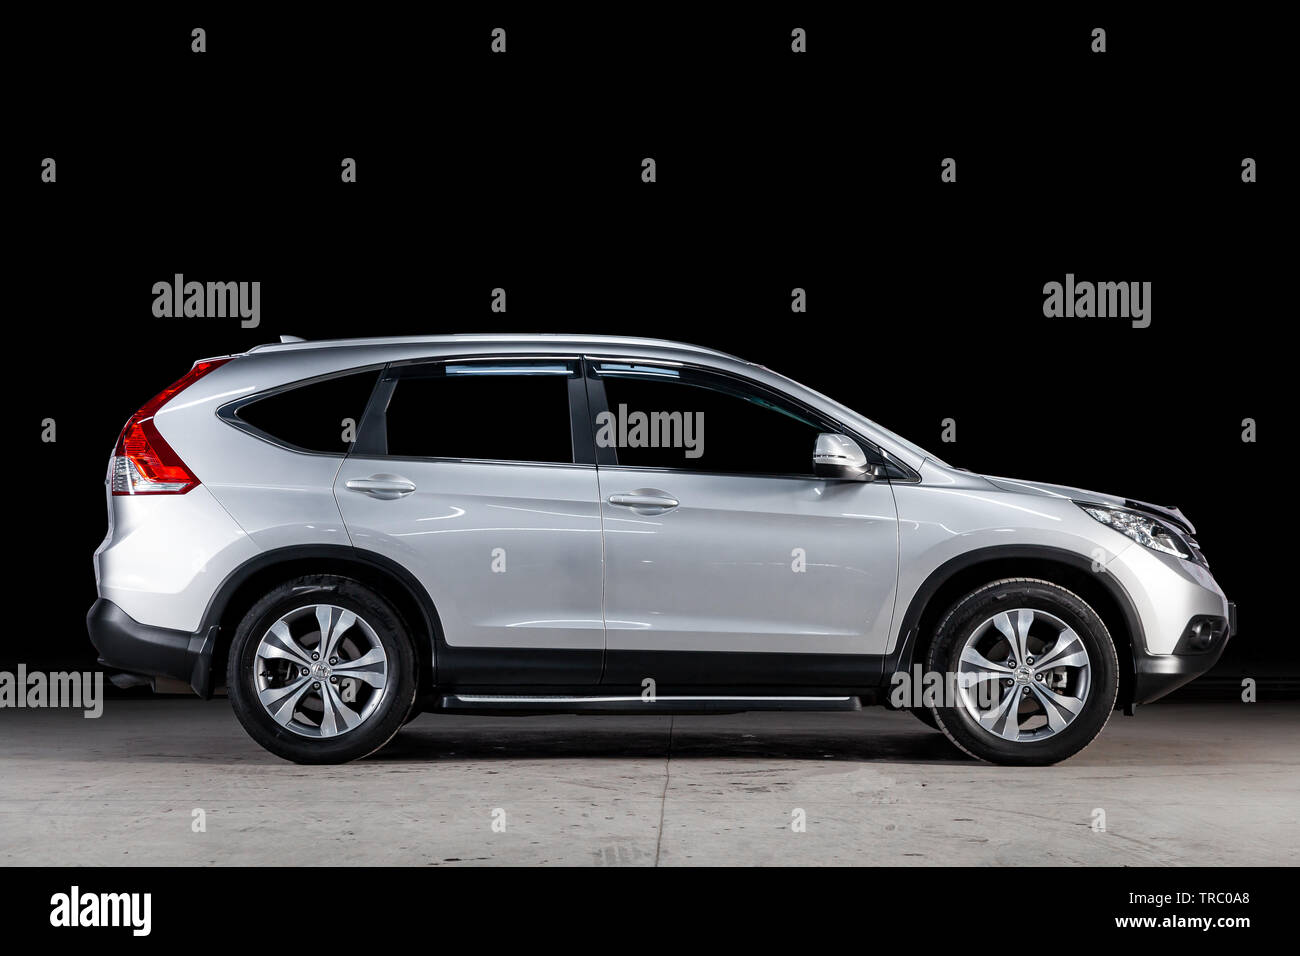 Novosibirsk Russia May 28 19 Honda Cr V Side View Photography Of A Modern Car On A Parking In Novosibirsk Stock Photo Alamy